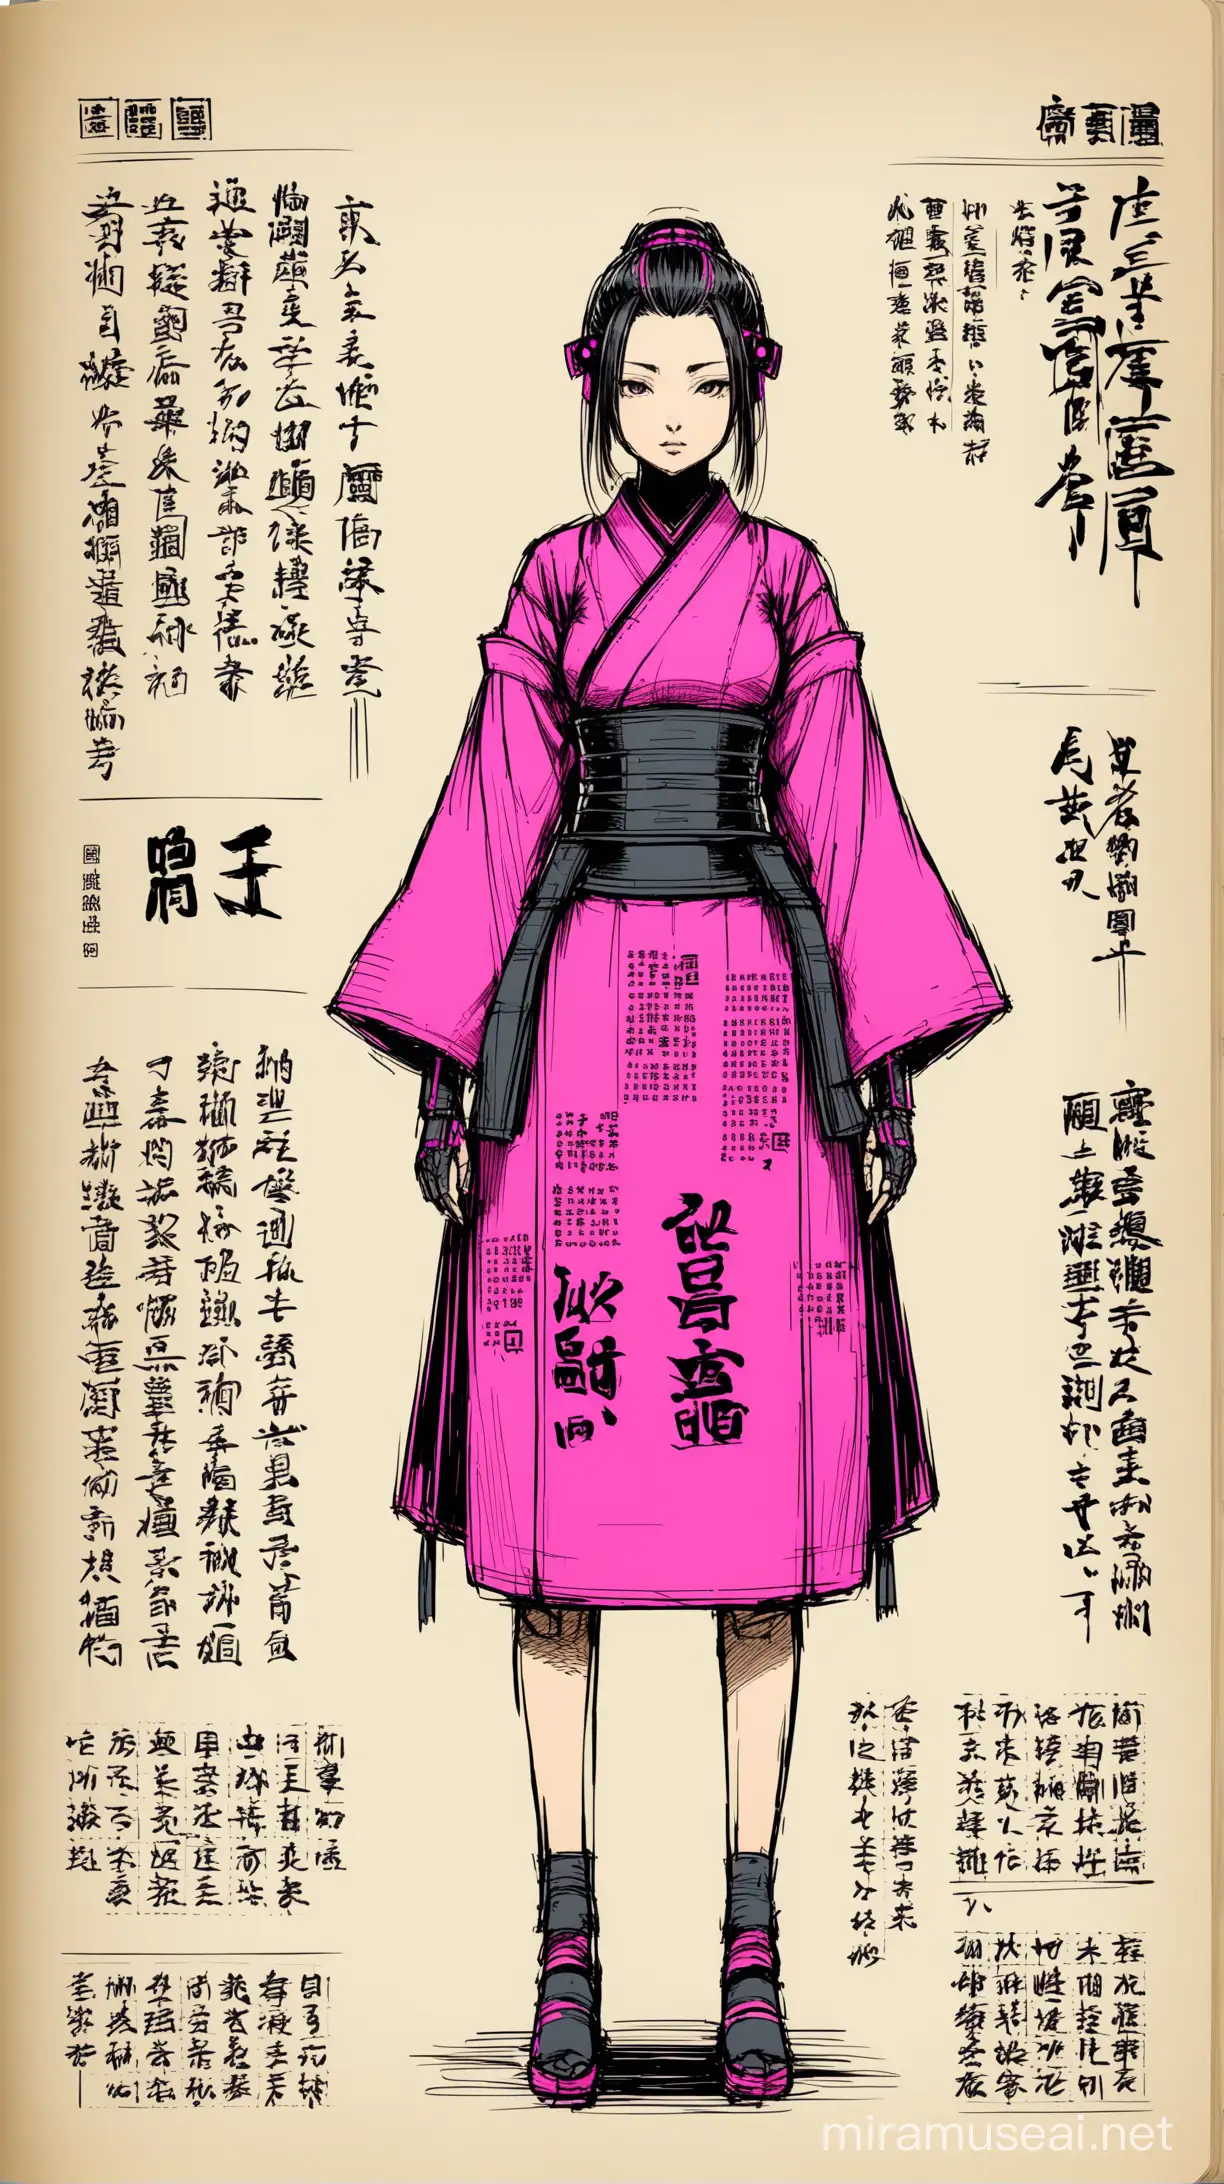 girly color, Sketch book, hand drawn, pink, elegant, realistic sketch, Rough sketch, mix of bold dark lines and loose lines, bold lines, on paper, character sheet, old fashion dress, humanoid, Full body, kanji writing, japanese writing, japanese feudal era clothing, cyberpunk 2077 clothing, medieval futuristic era clothing